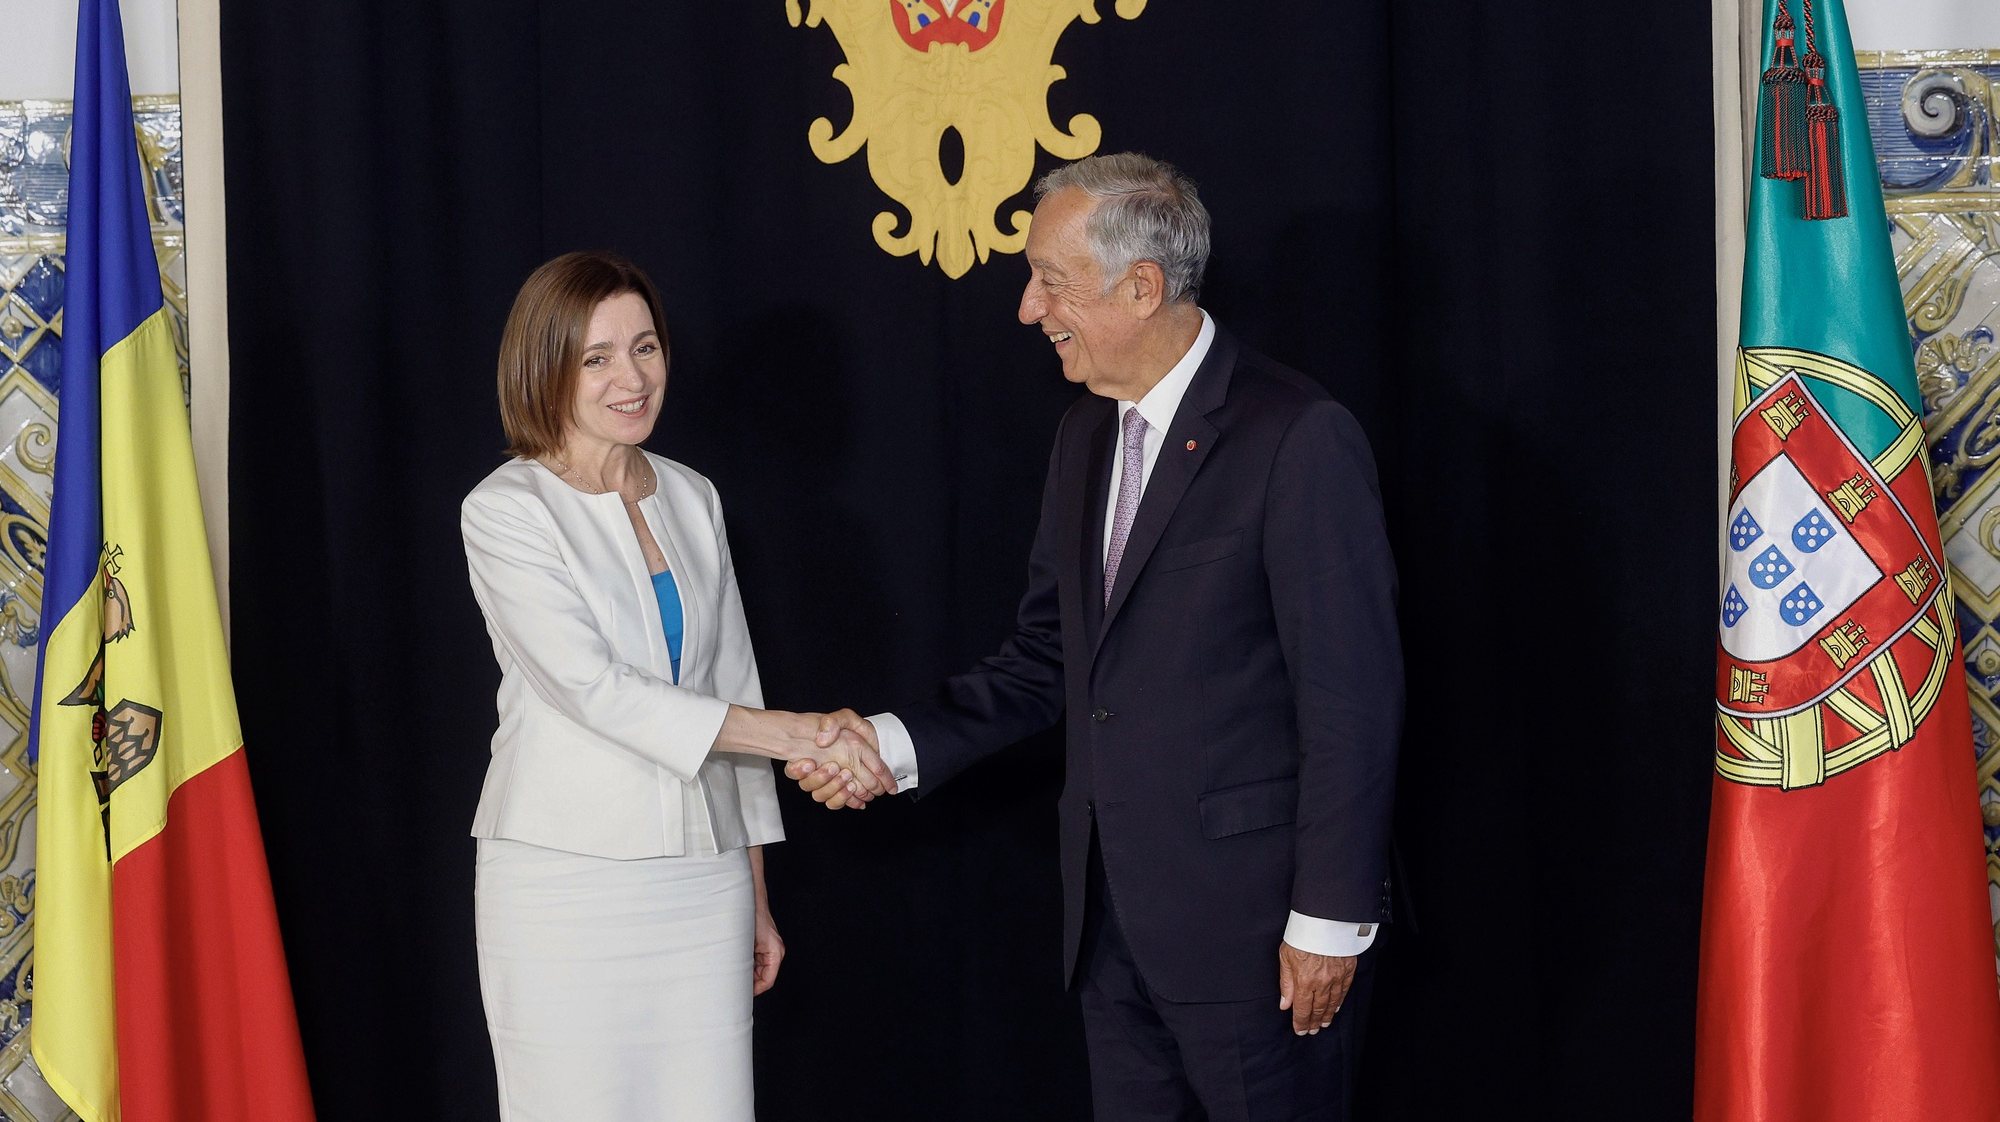 Portugal&#039;s President Marcelo Rebelo de Sousa (R) greets Moldova&#039;s President Maia Sandu (C-L) at the welcome ceremony at Palacio de Belem in Lisbon, Portugal, 03 October 2023. The President of the Republic of Moldova Maia Sandu is making a state visit on October 2-4 to the Portuguese Republic to promote the country&#039;s accession to the European Union and to deepen bilateral relations. ANTONIO PEDRO SANTOS/LUSA